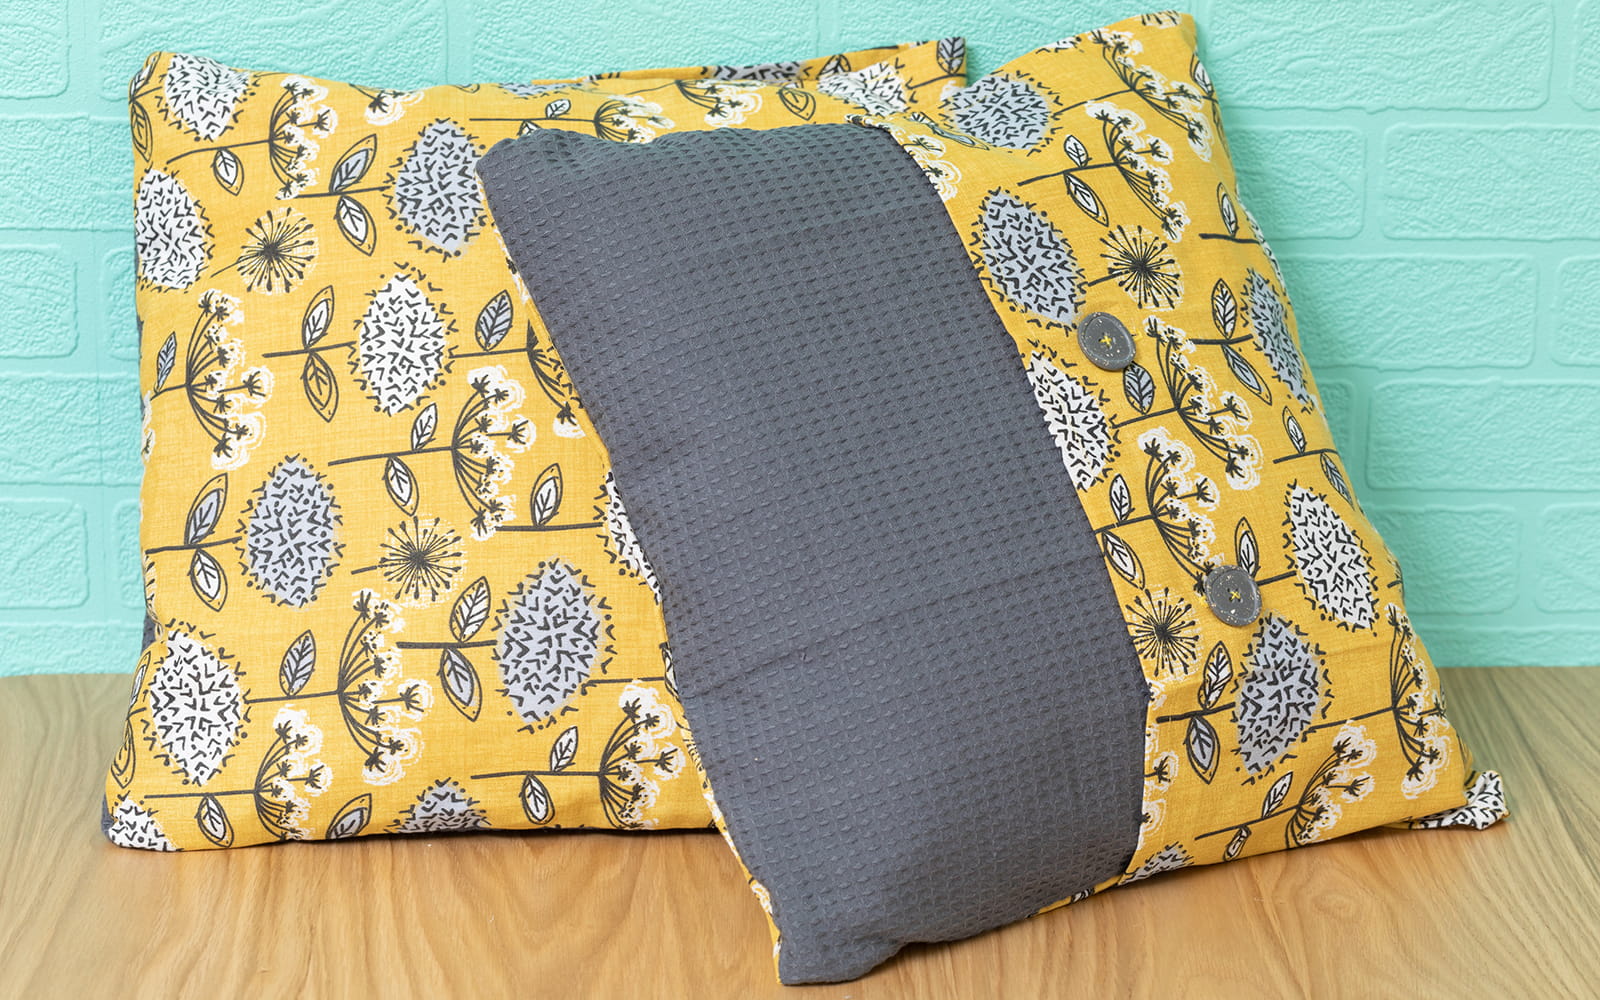 Grey and yellow tea towel cushions turquoise background